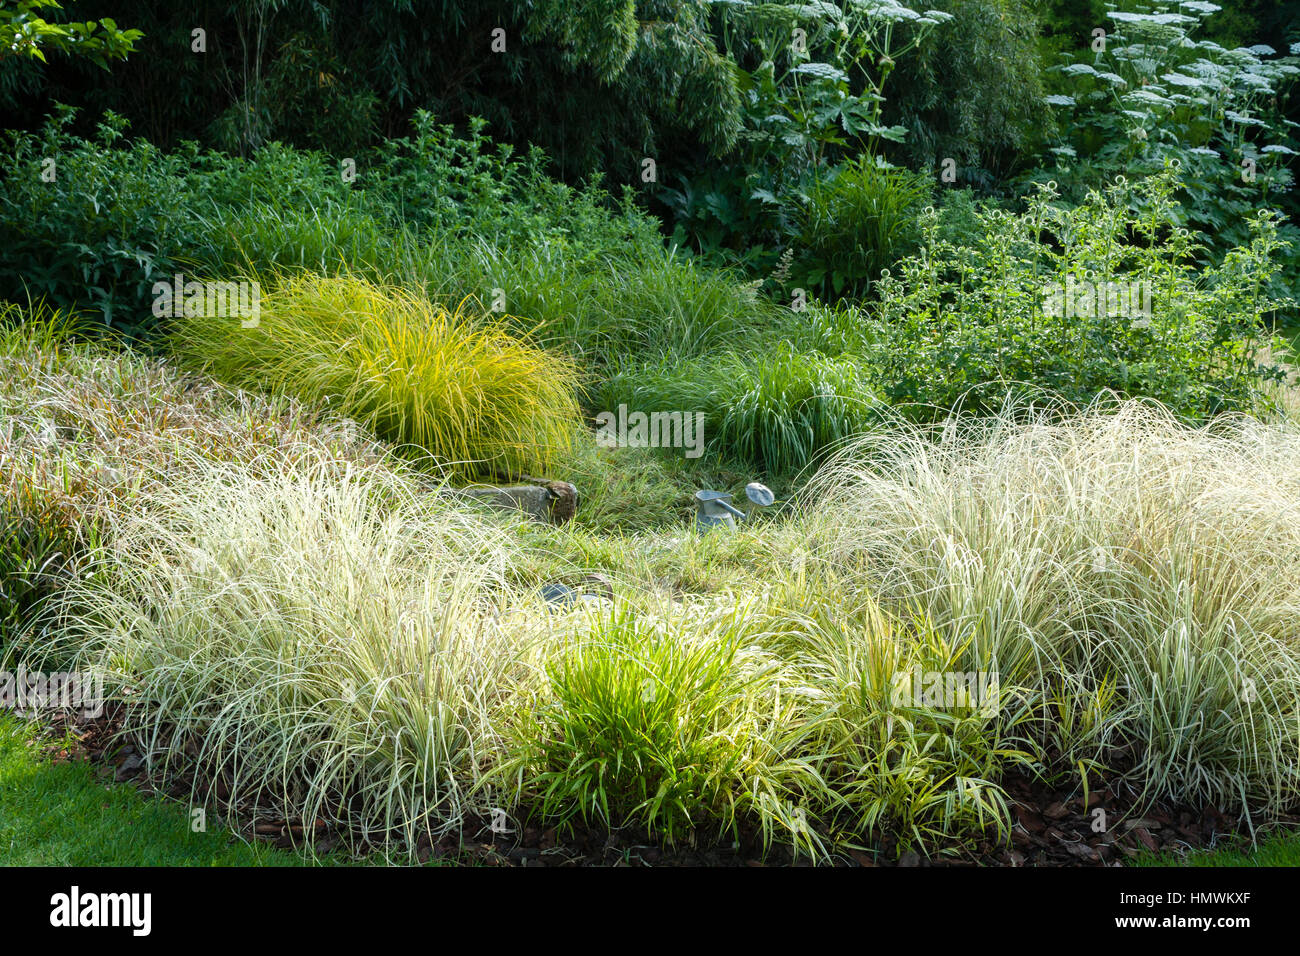 Bed of grasses in spring, Jardins du pays d'Auge, Normandy, France Stock Photo